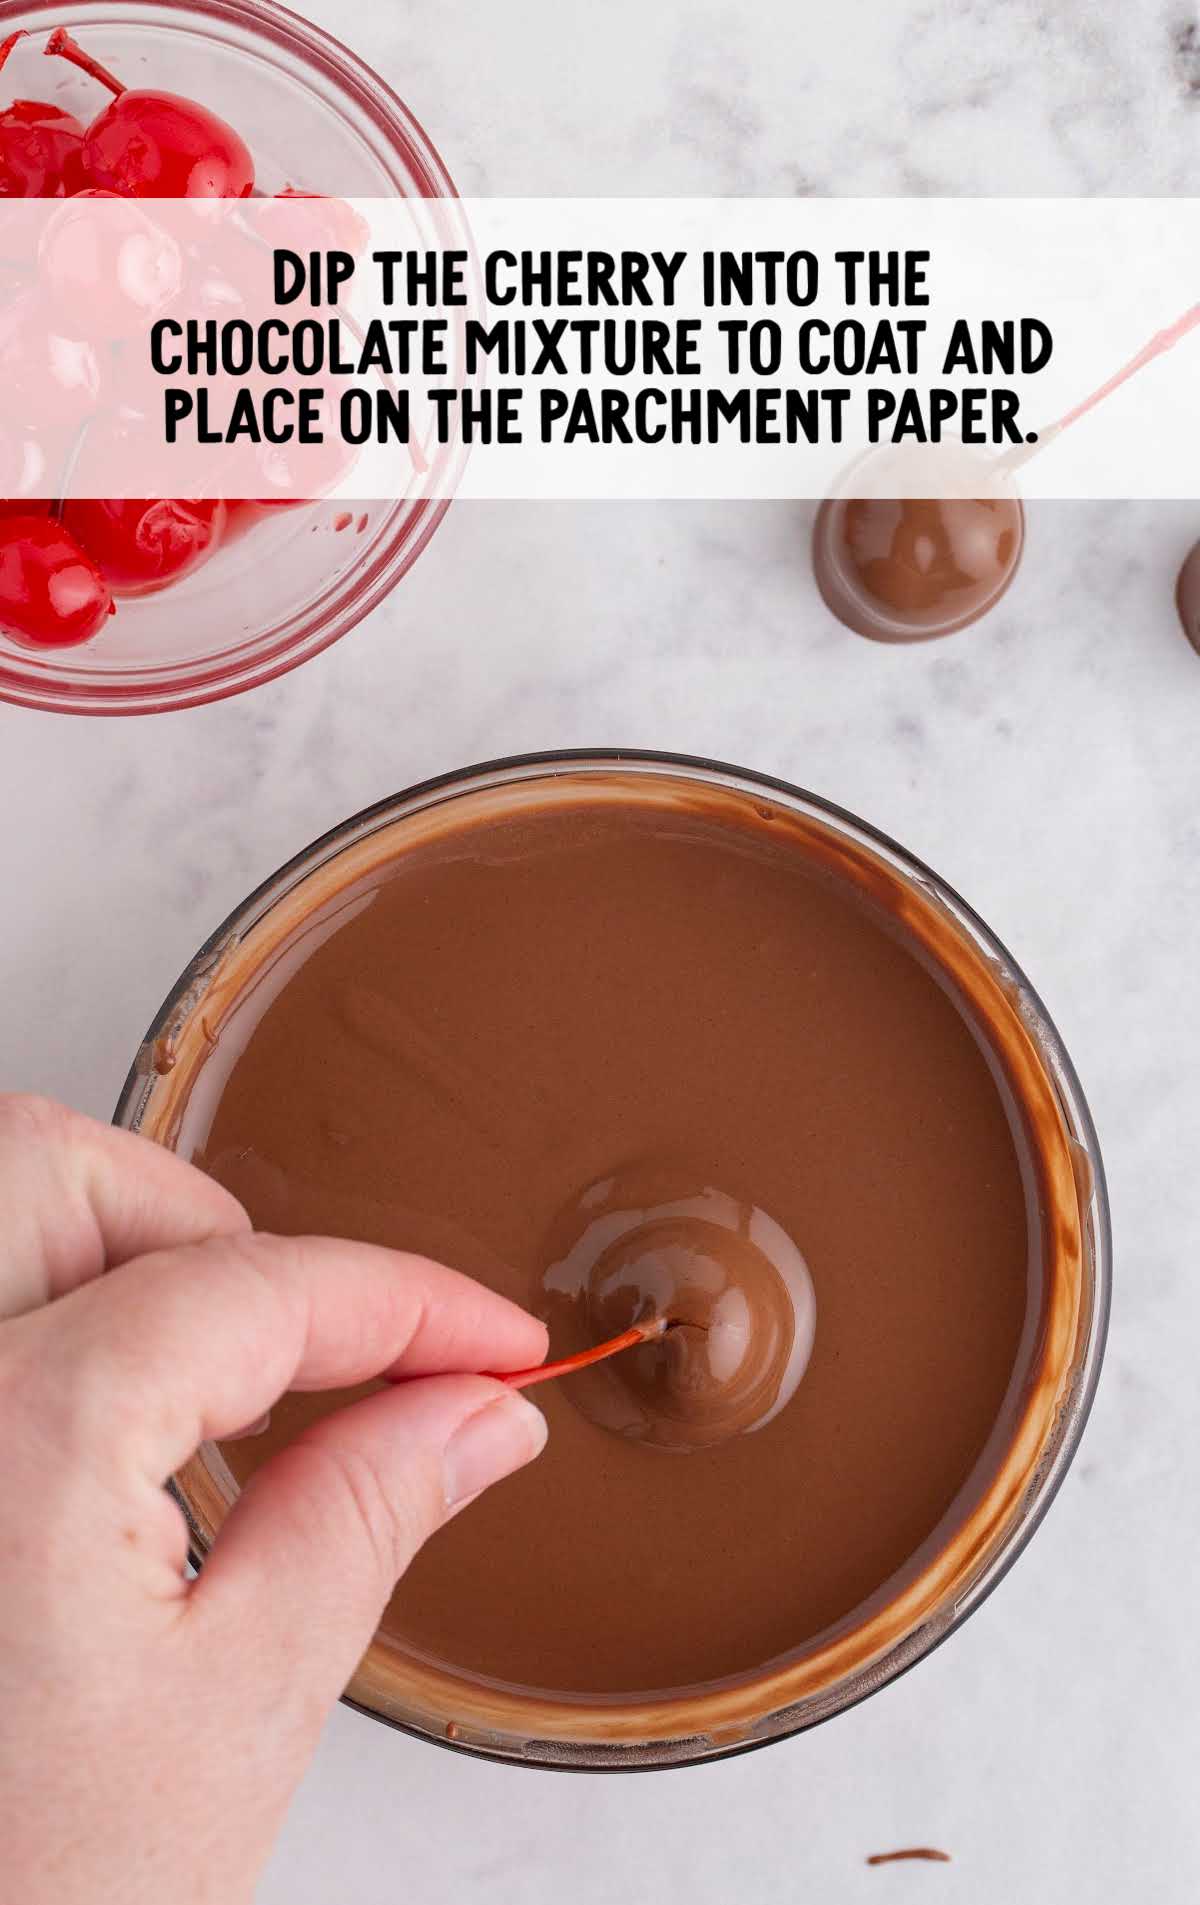 a maraschino cherry dipped into the bowl of melted chocolate